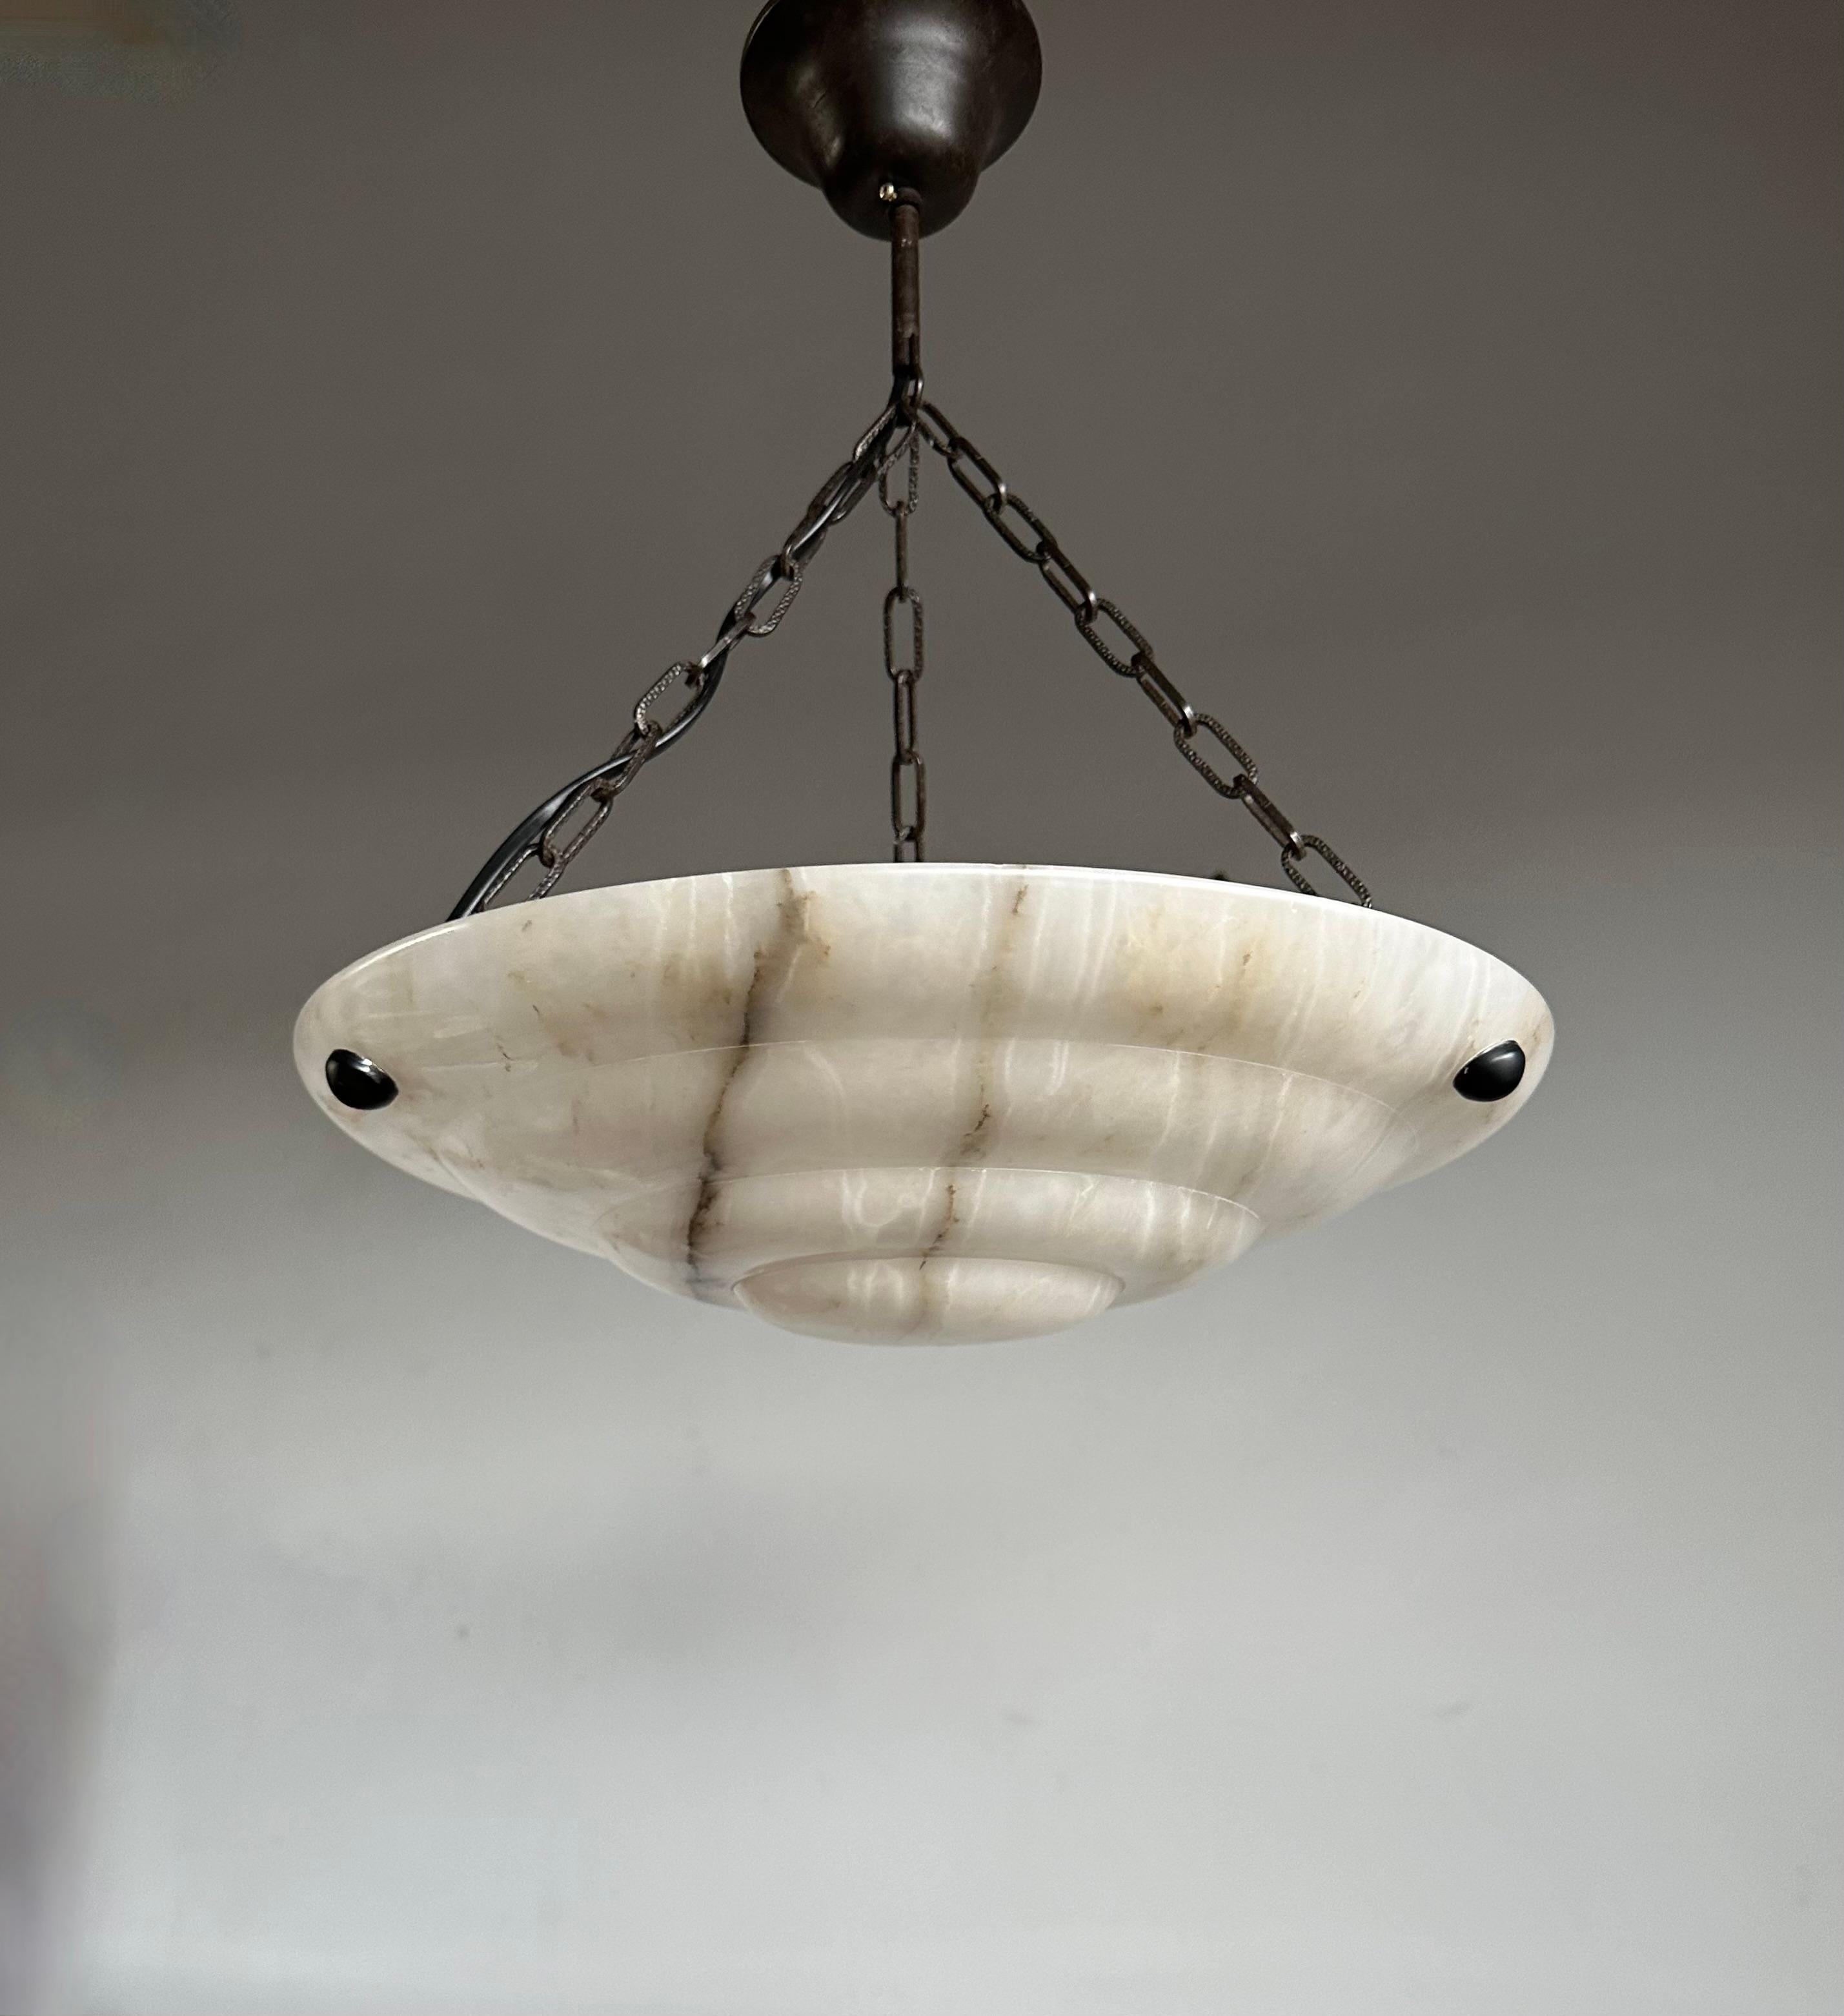 Superb condition pendant with a stunning and good size alabaster mineral stone shade.

Thanks to its good size and white color and remarkable design this alabaster chandelier will light up both your days and evenings. It is in excellent condition